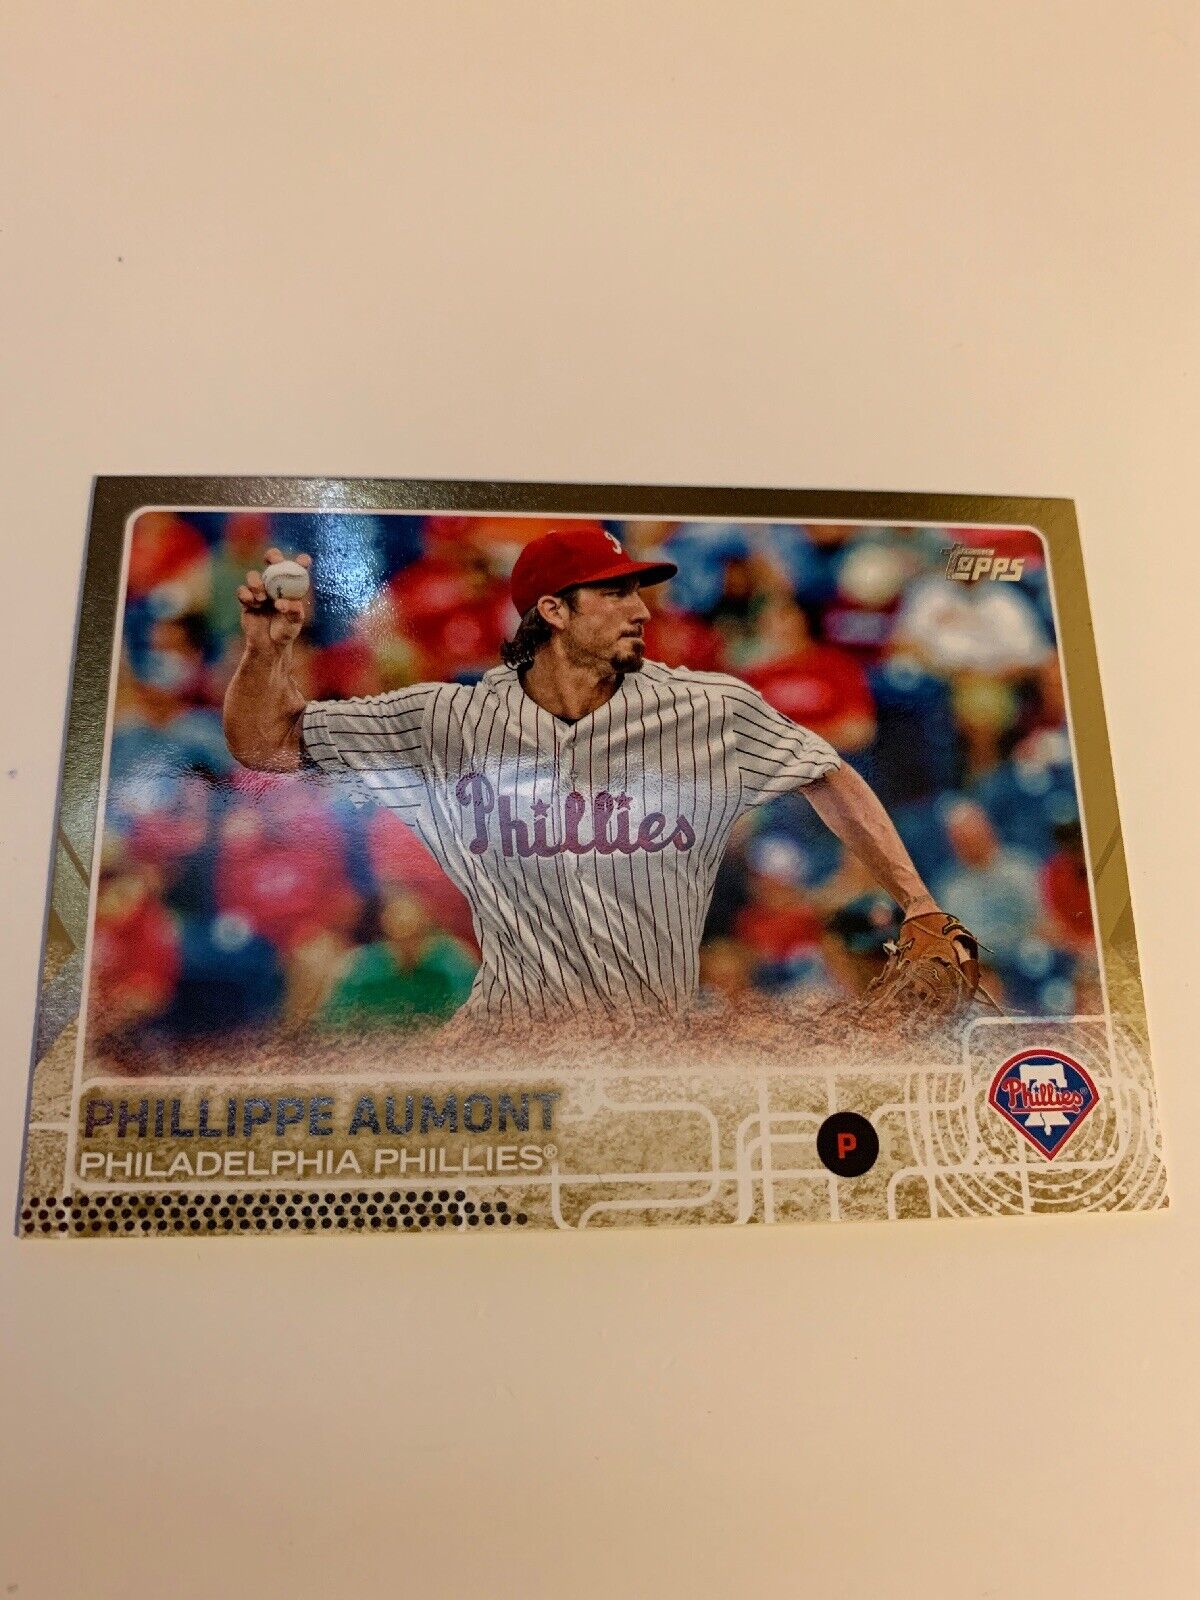 2015 Topps Update Gold Foil US318 Phillippe Aumont 623/2015 Phillies